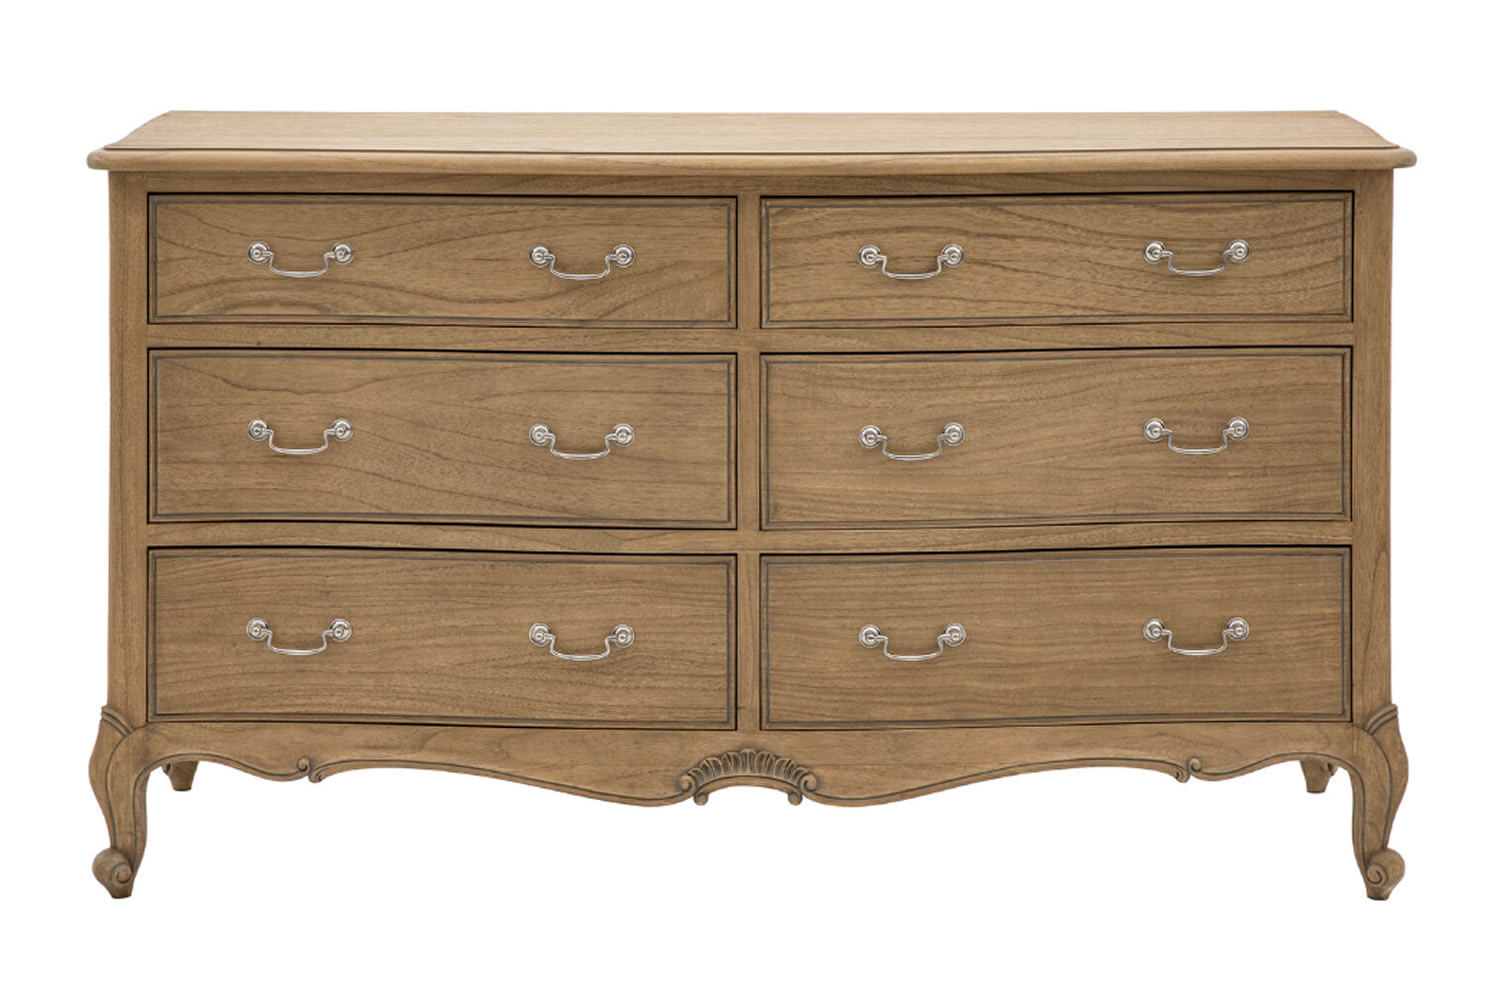 View Chic 6 Drawer Chest Weathered Wide Bedroom Storage Unit With Sliding Drawers Crafted From Solid Mindy Ash Traditional French Furniture Design information